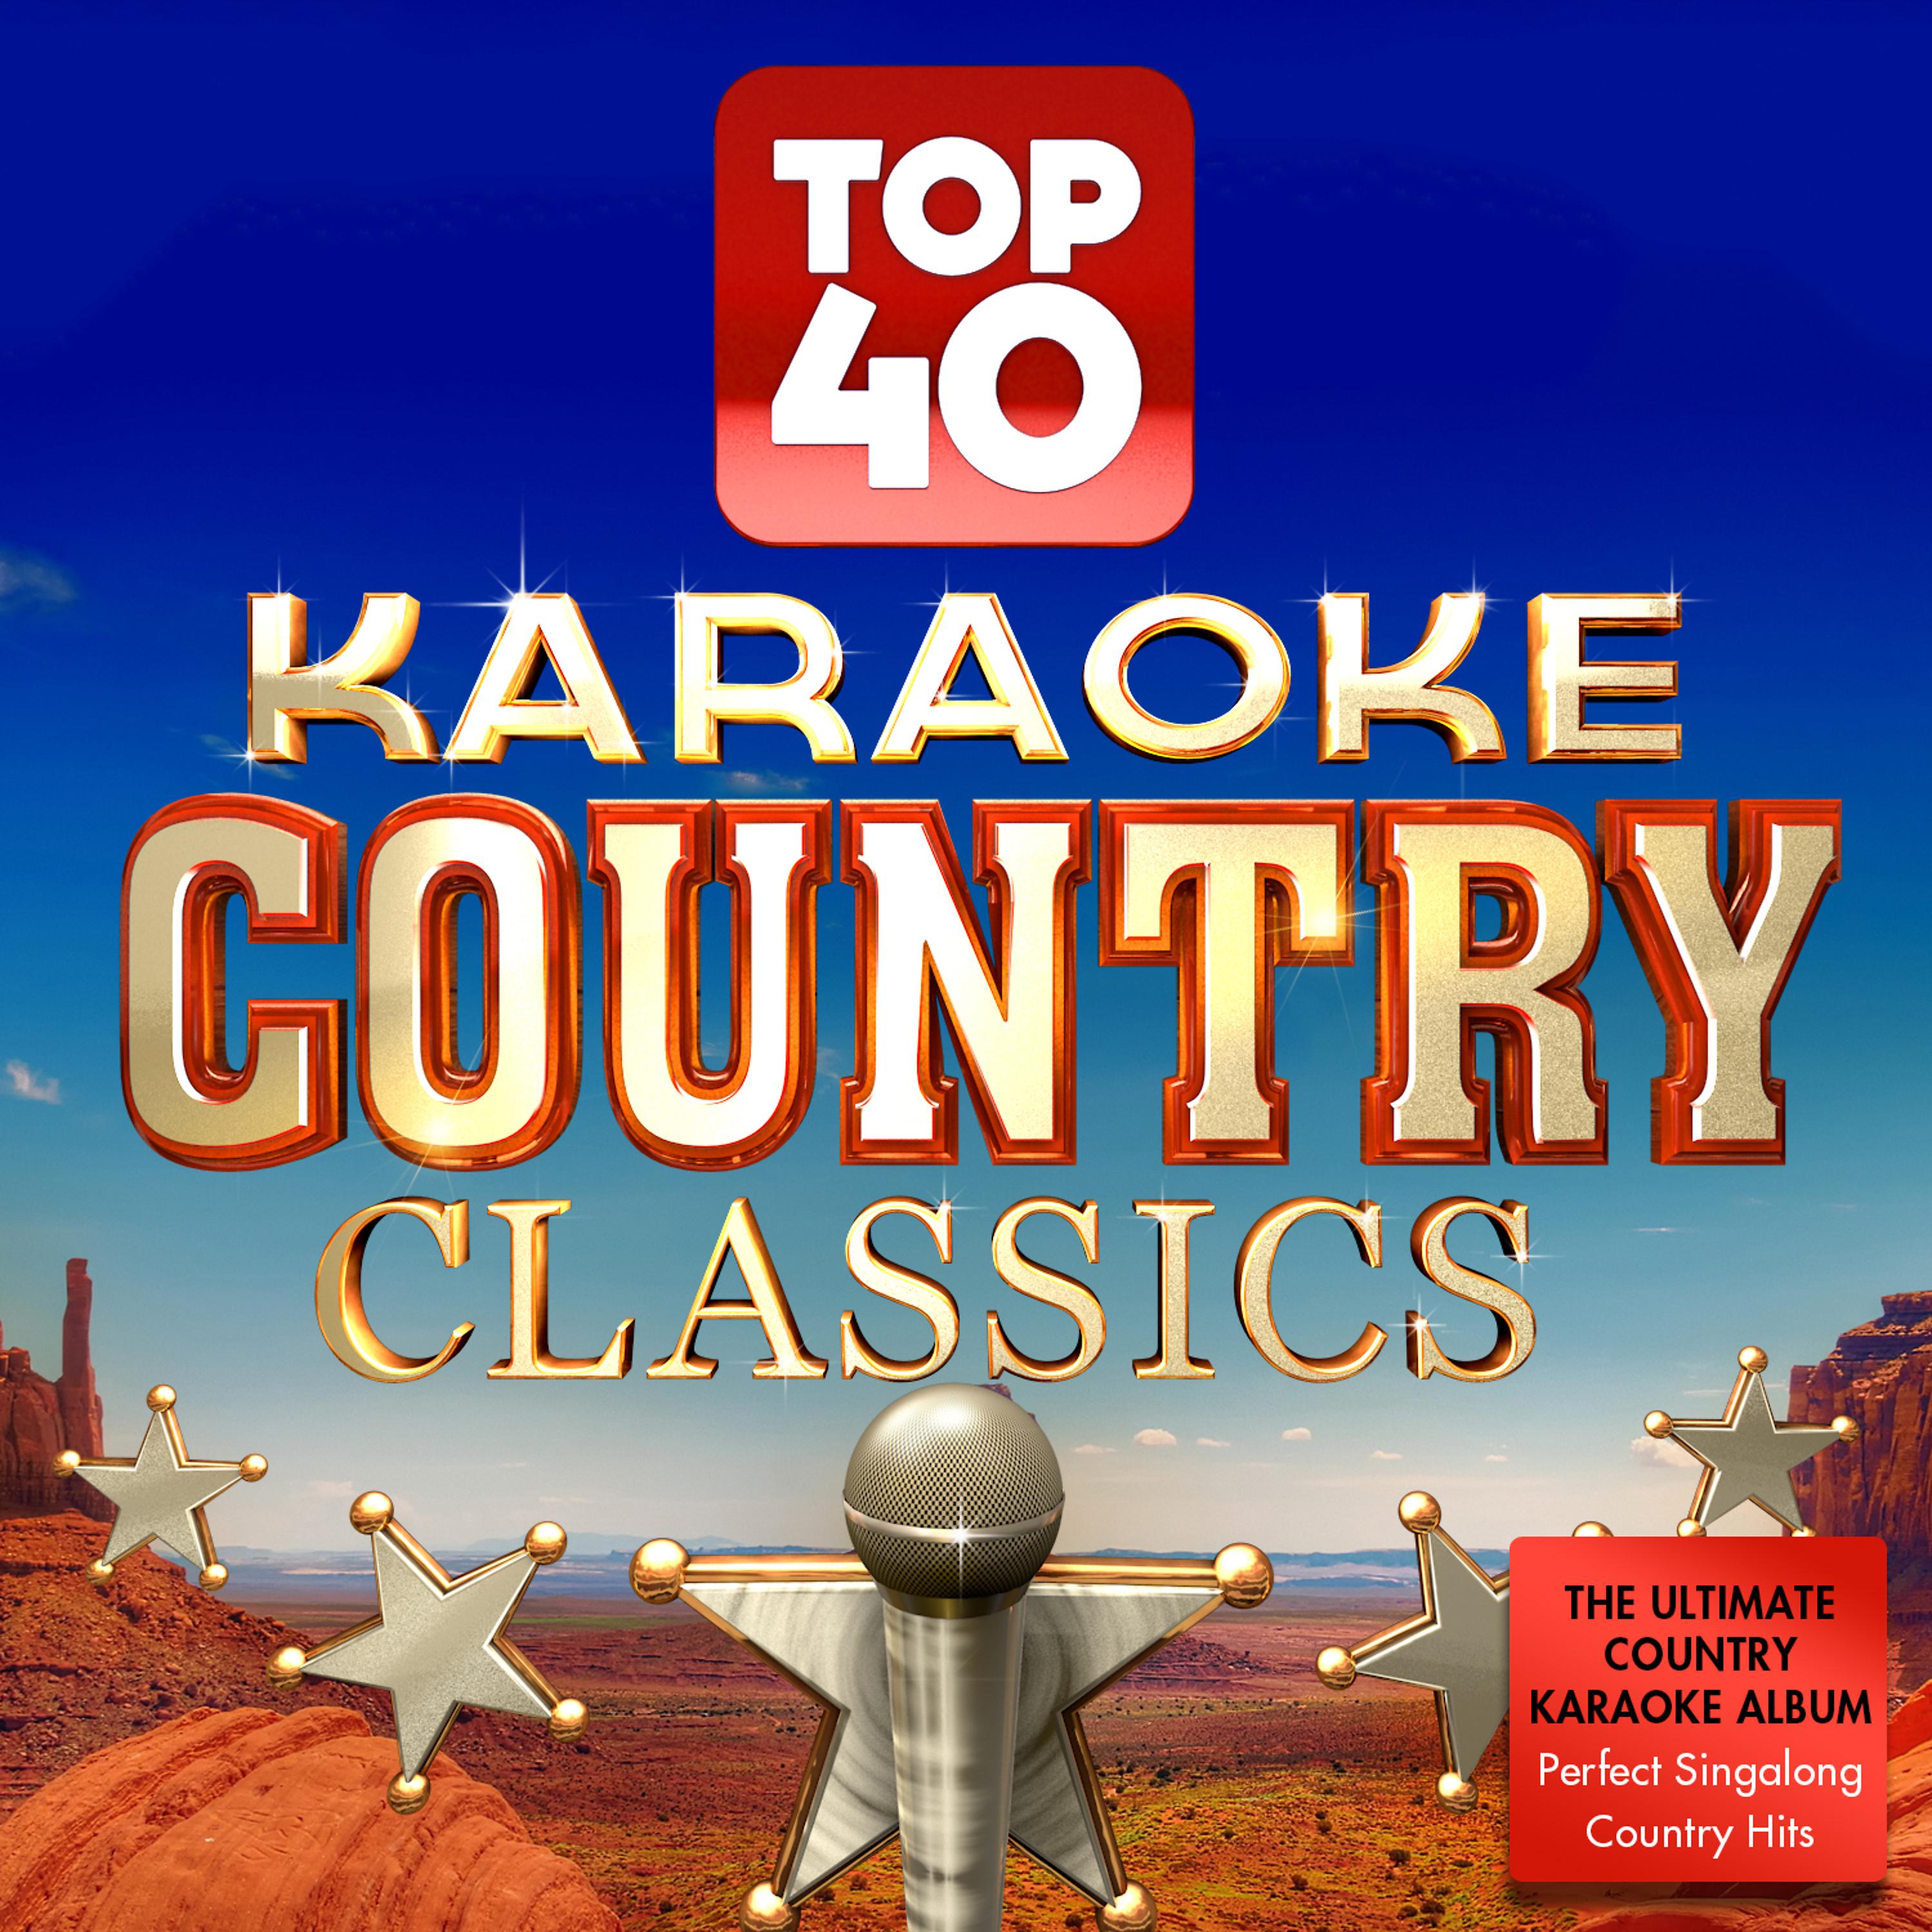 Постер альбома Top 40 Karaoke Country - The Ultimate Country Karaoke Album - Perfect Singalong Country Hits